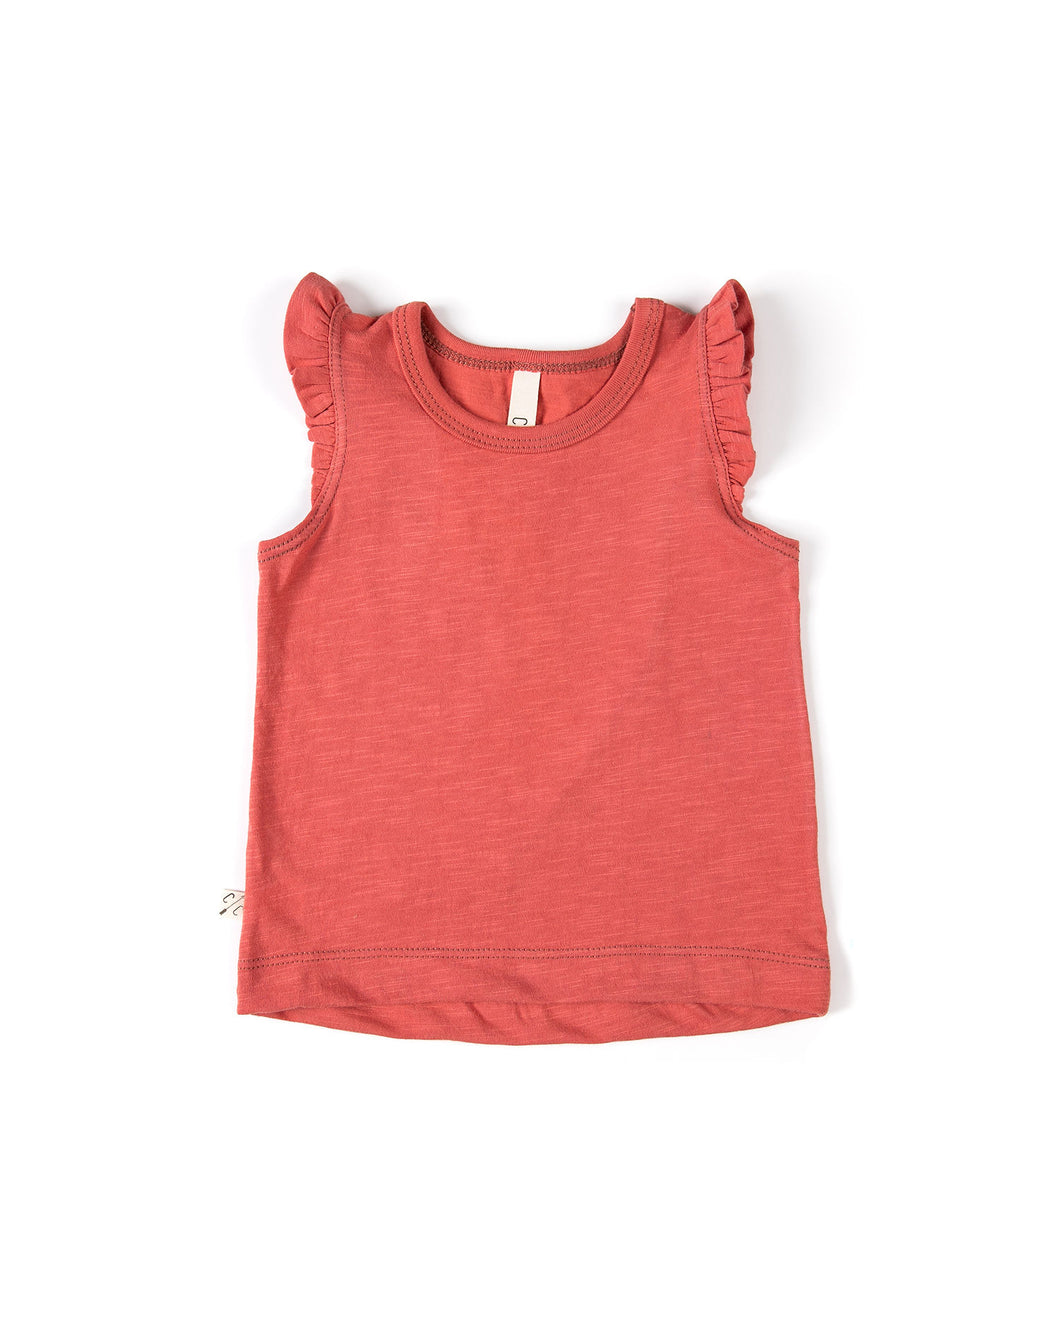 flutter tee - mineral red